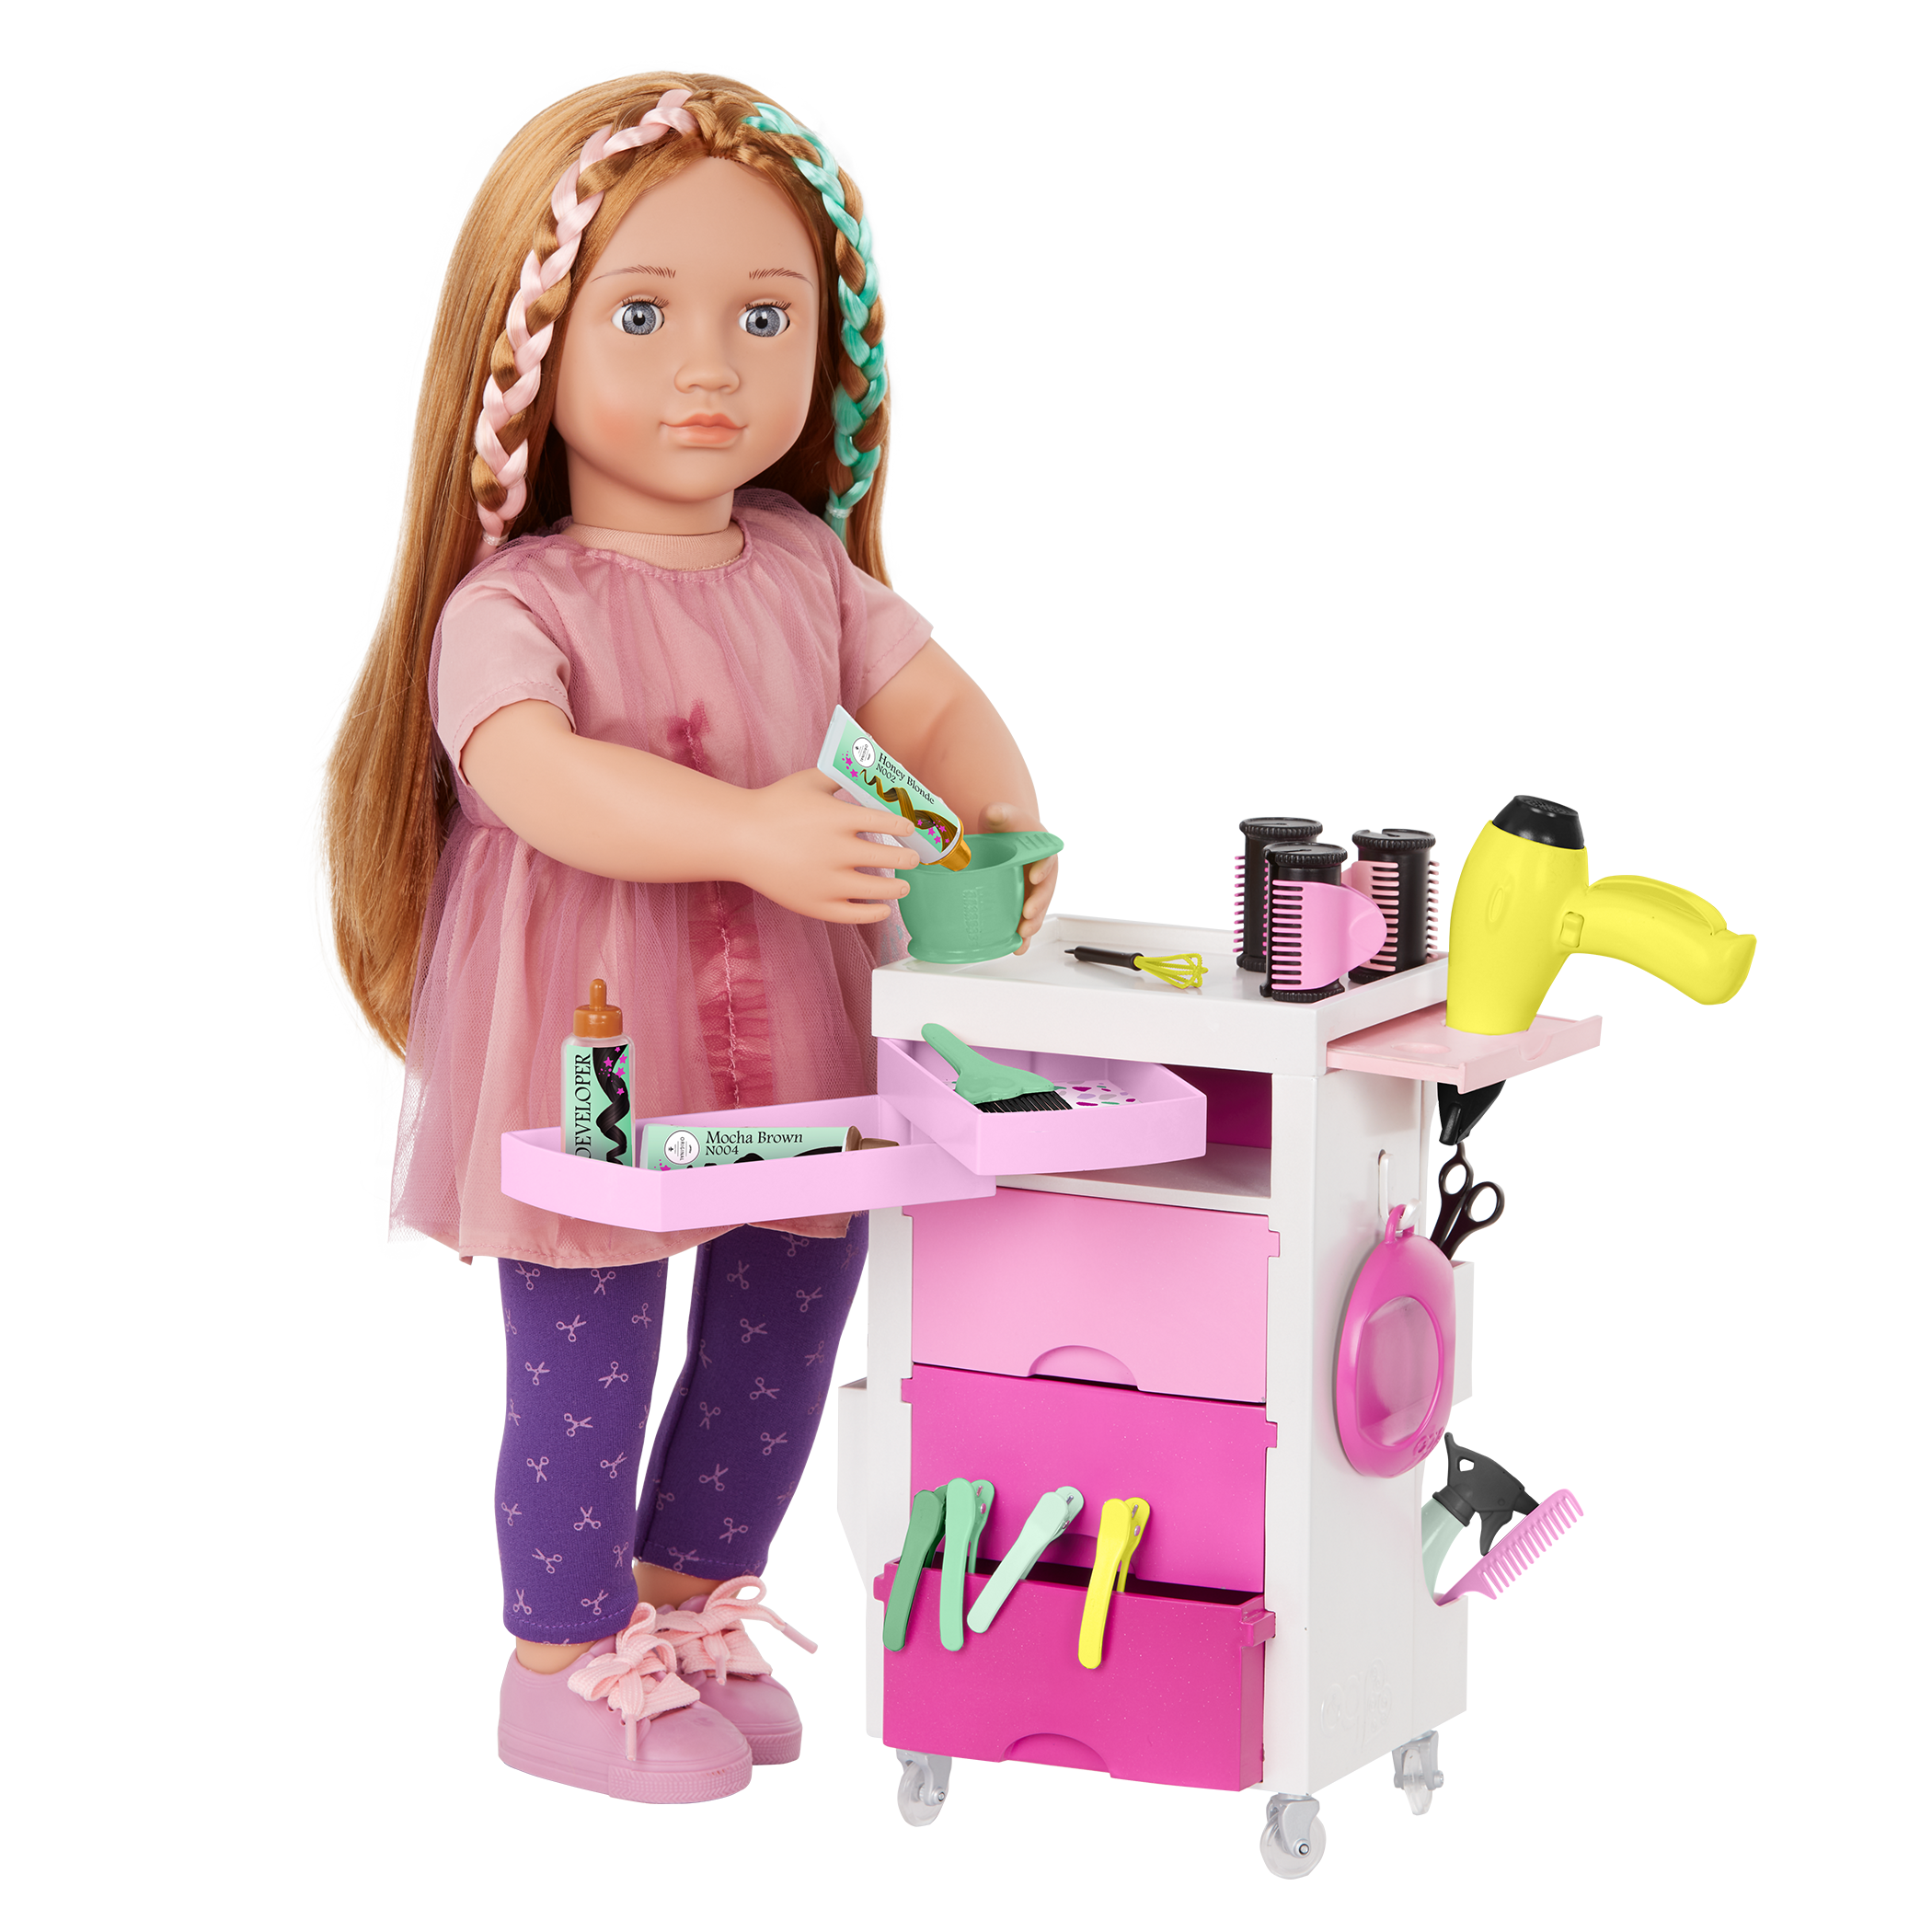 Our Generation Salon Cart Playset for 18-inch Dolls